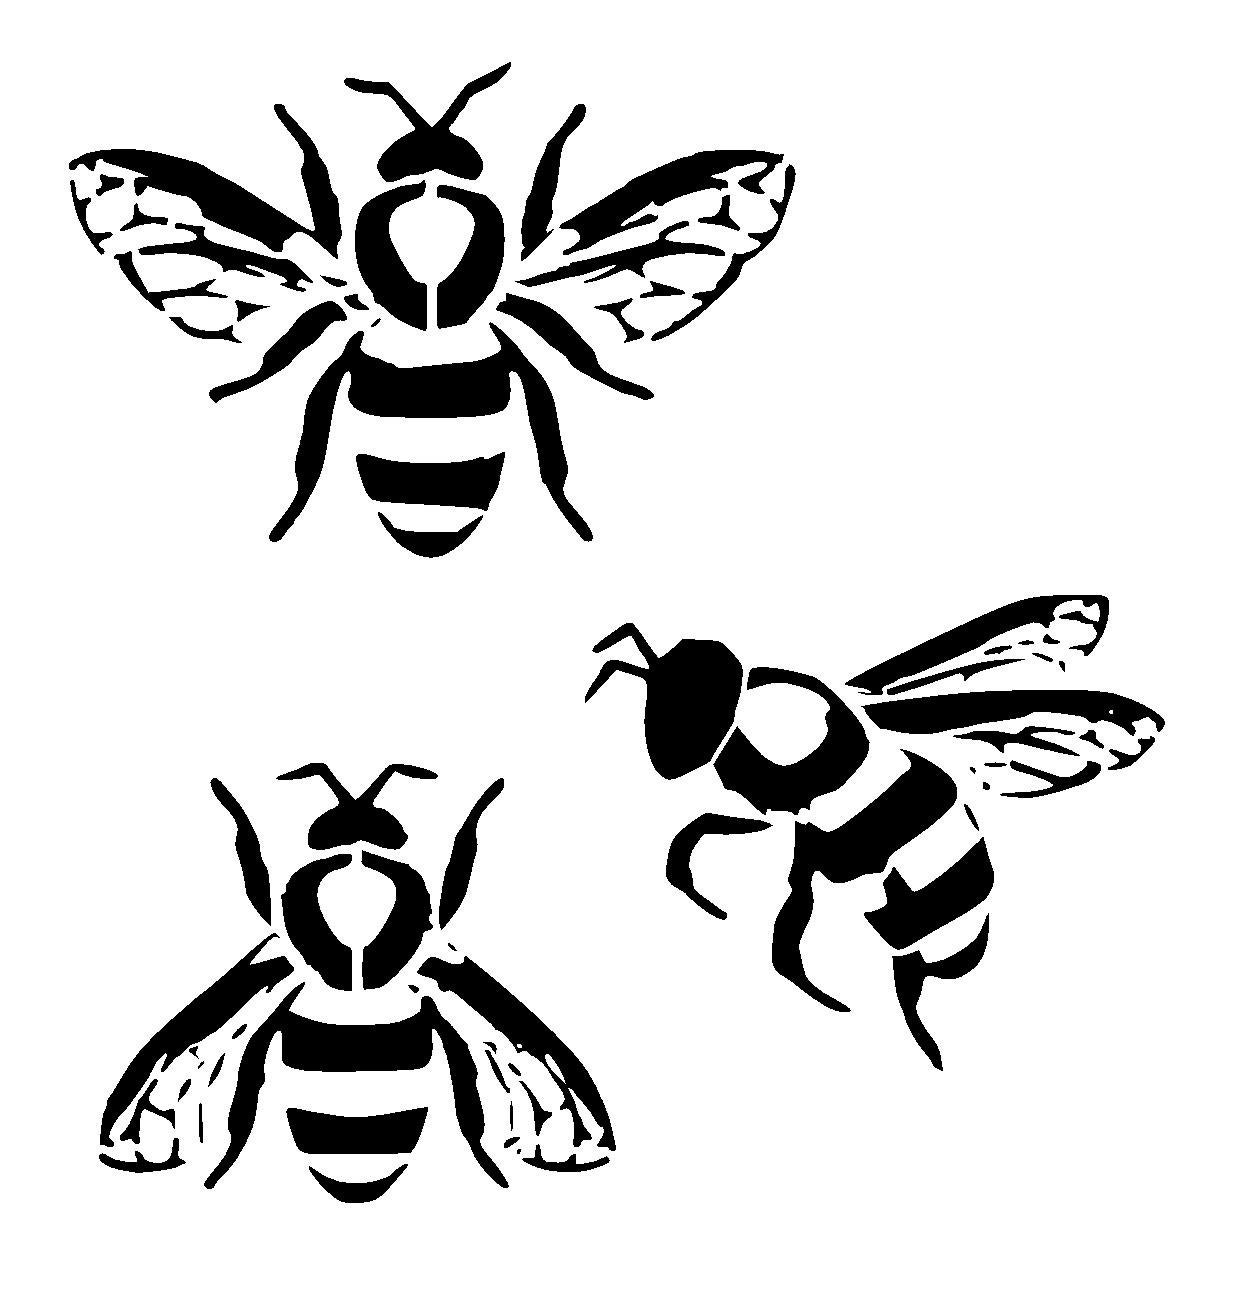 6/6 Bumble bee collection stencil.